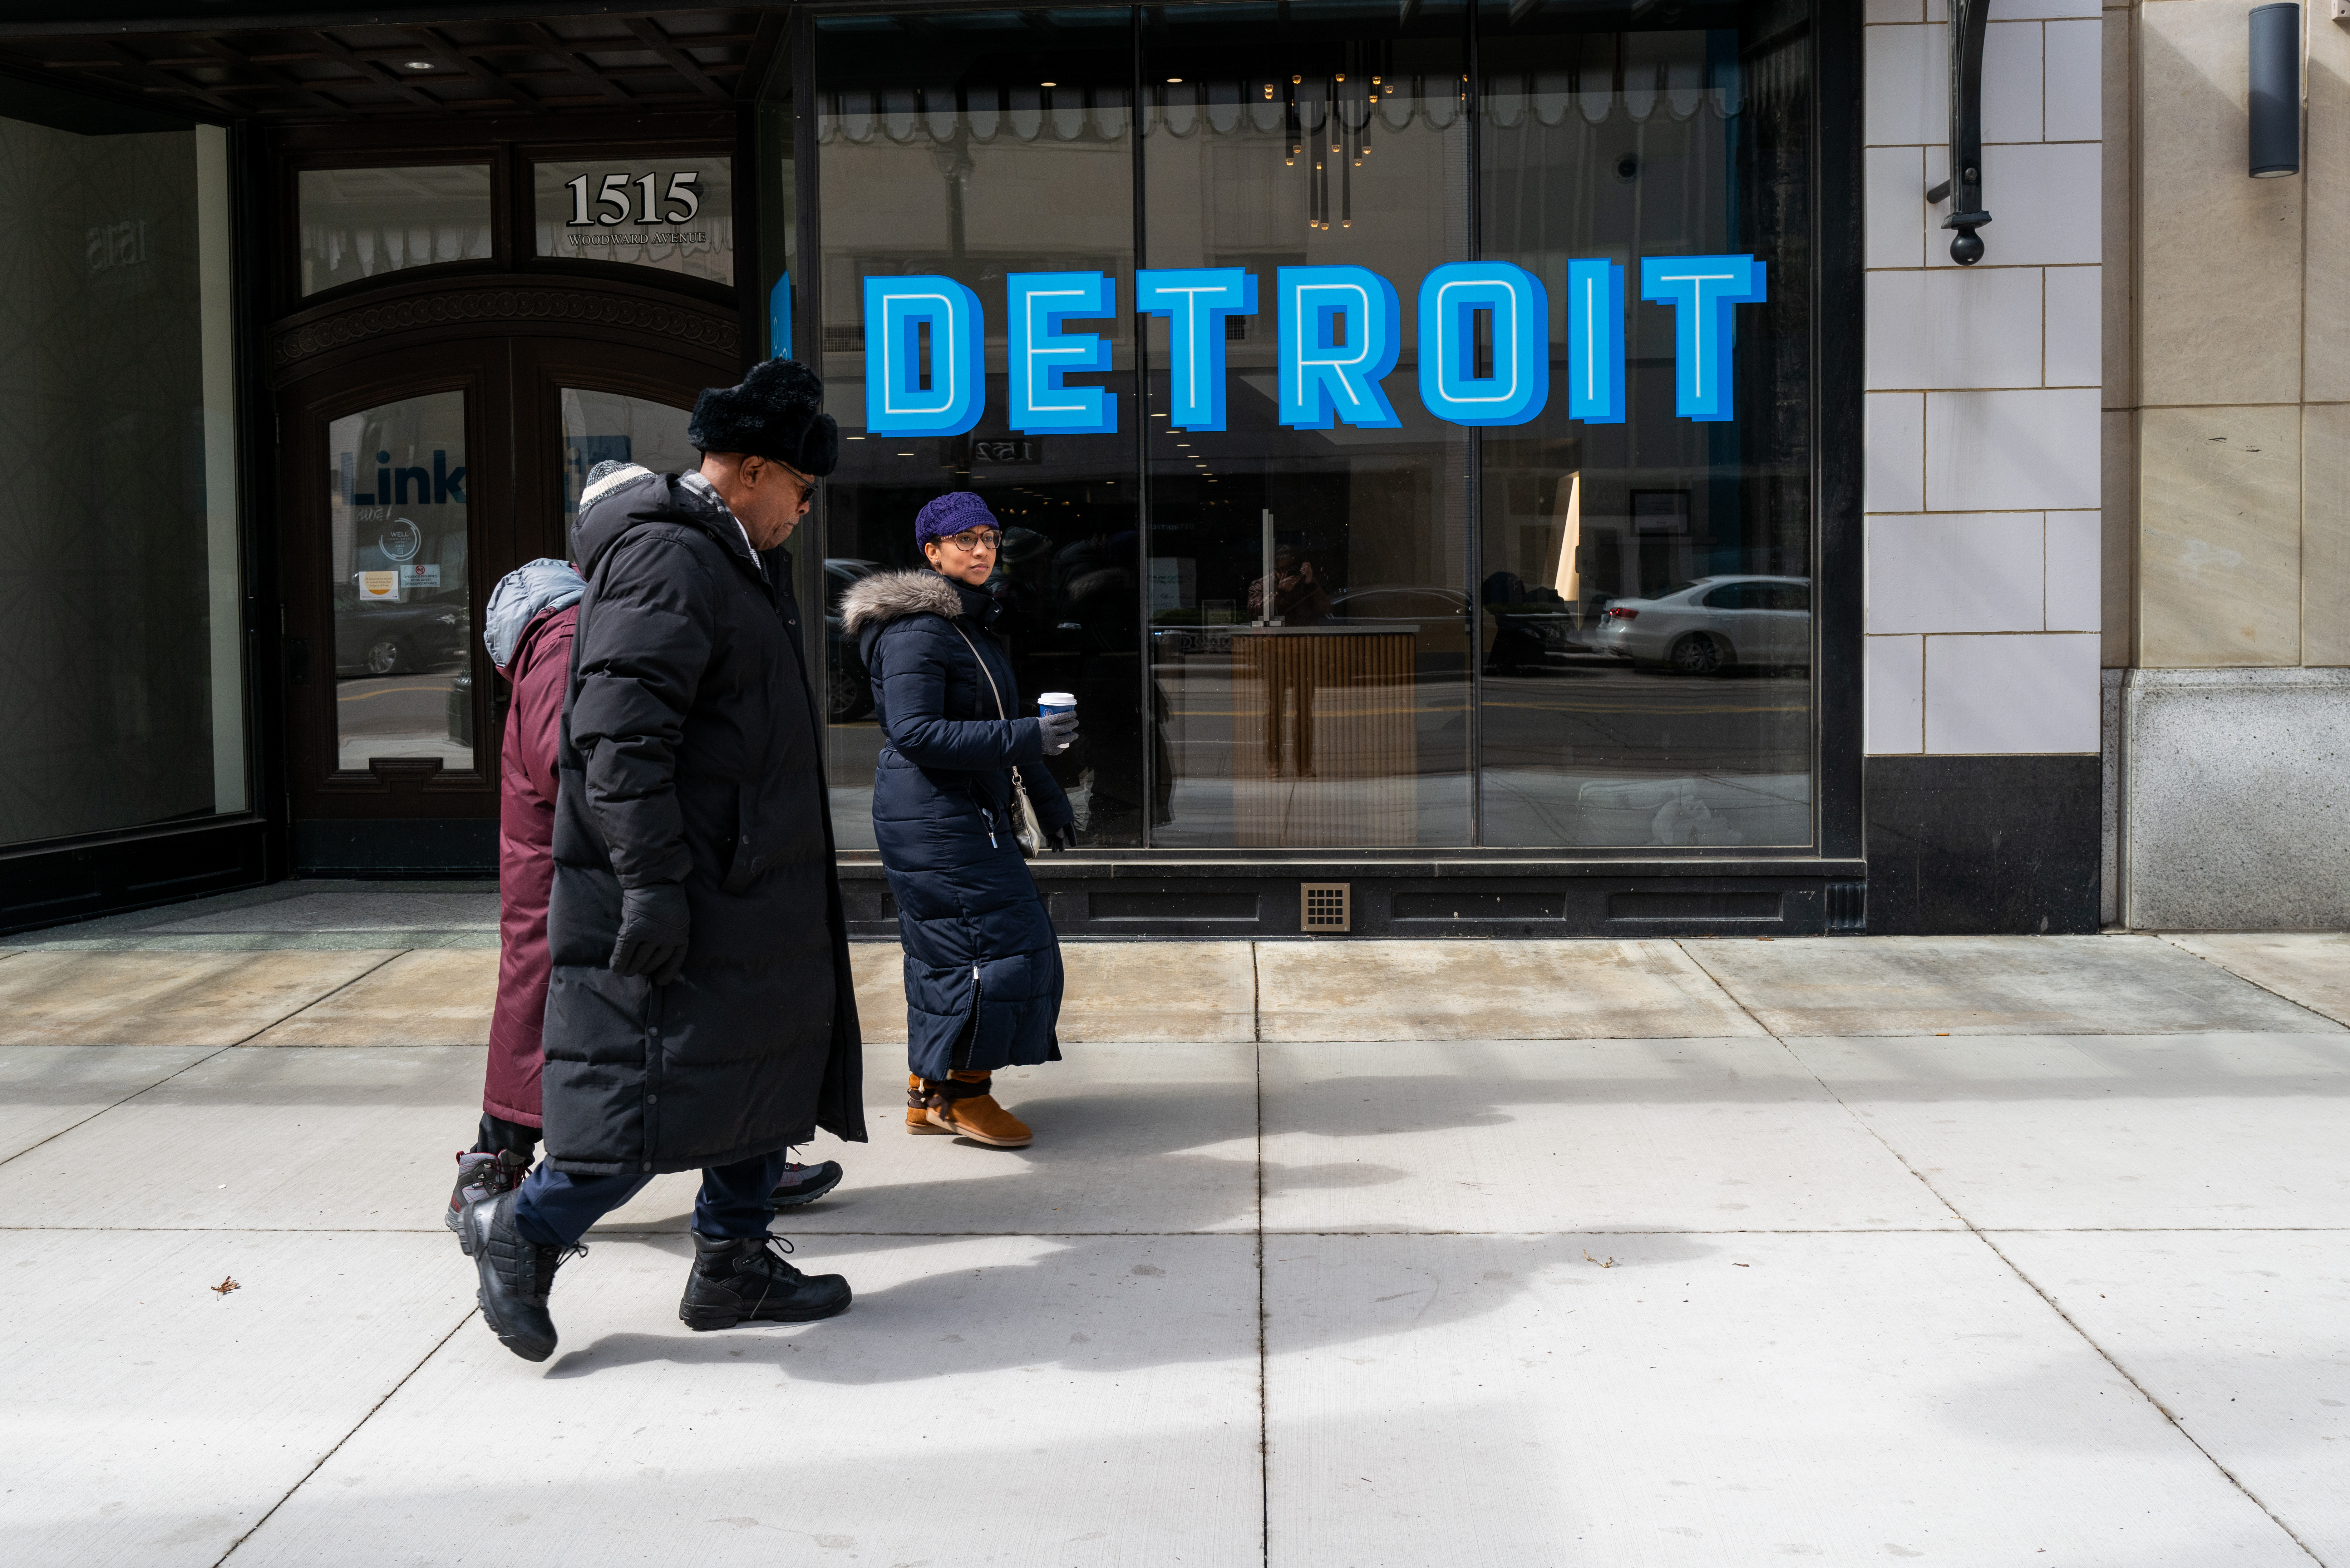 People wearing long puffer winter coats and hats walk on the sidewalk past a building whose window reads DETROIT in big blue letters.